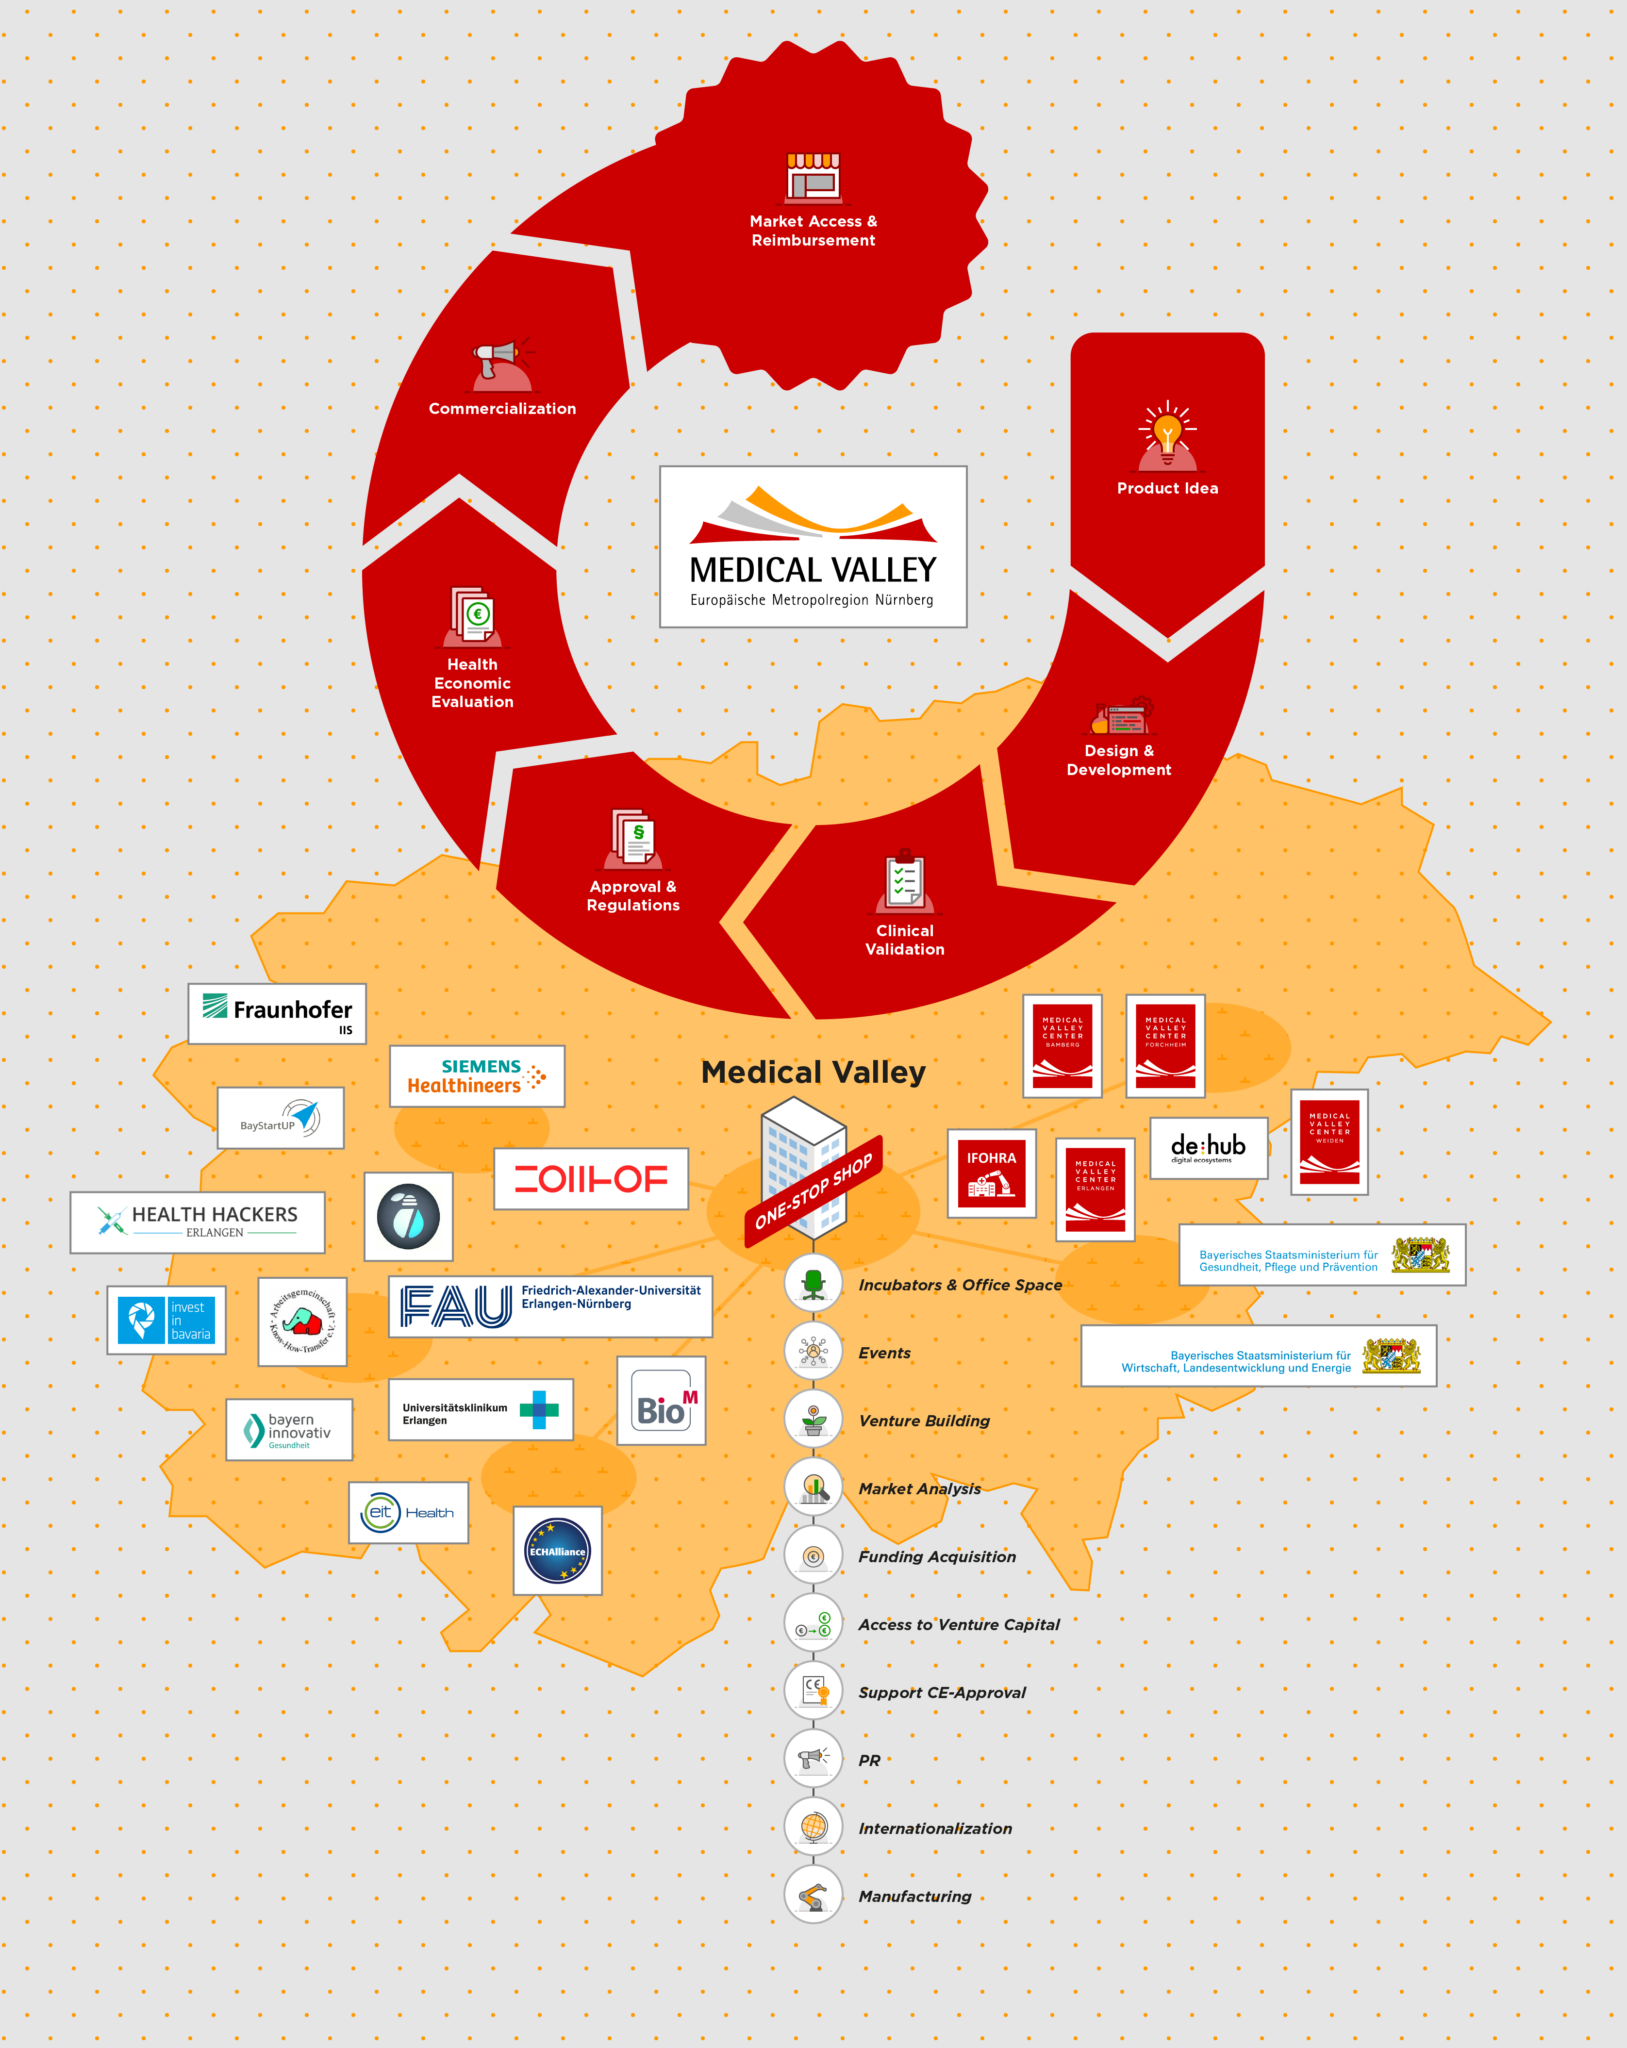 The graphic shows the Medical Valley ecosystem. This consists of the cluster locations, the companies from the MedTech sector and ministries.